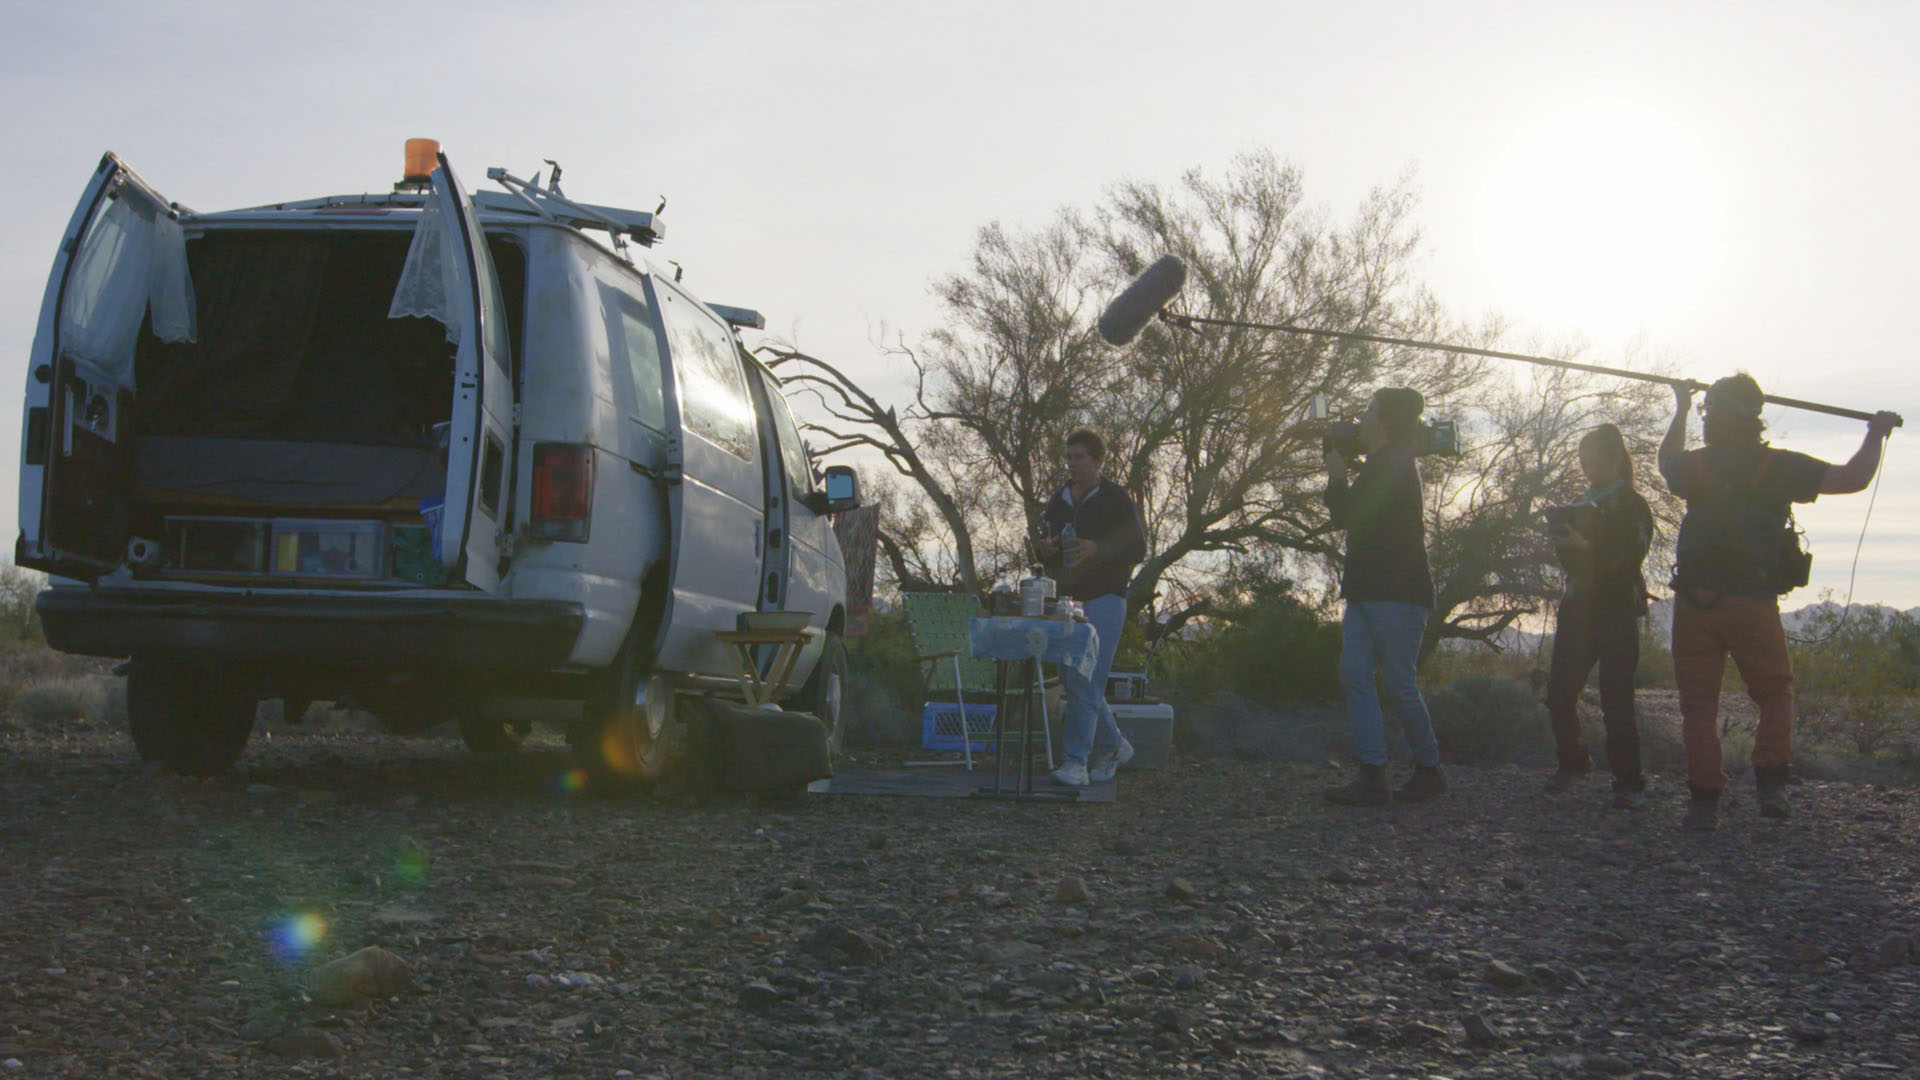 A core crew shoots the scene with Fern and the van.